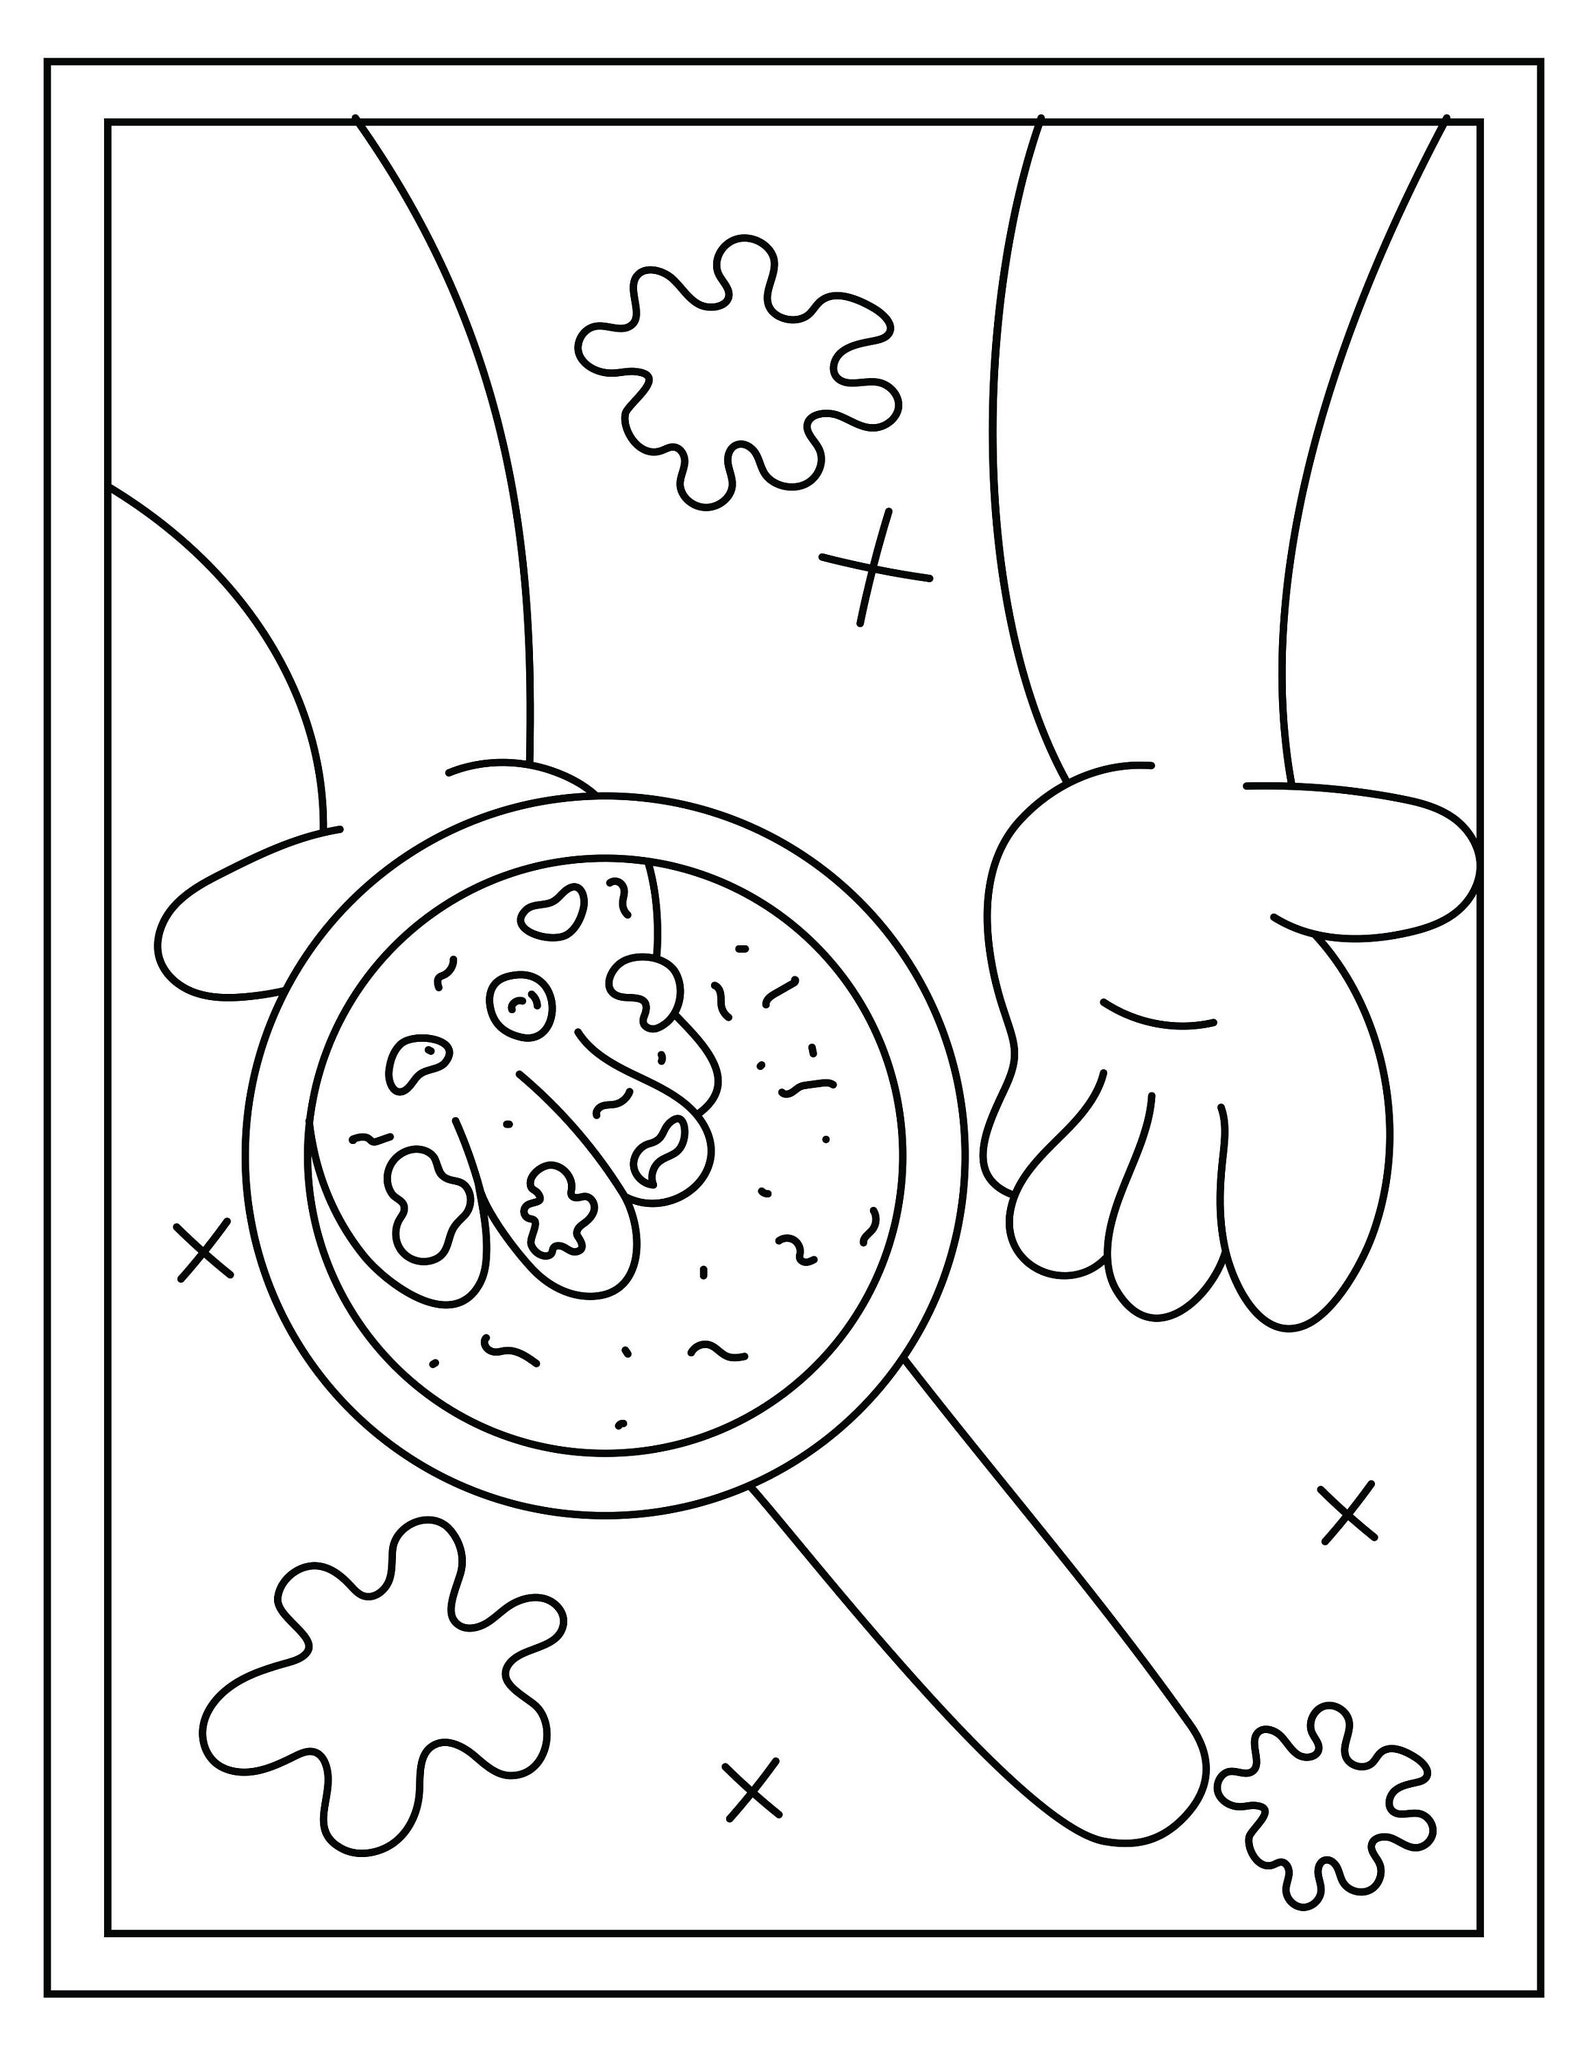 germ-coloring-pages-for-kids